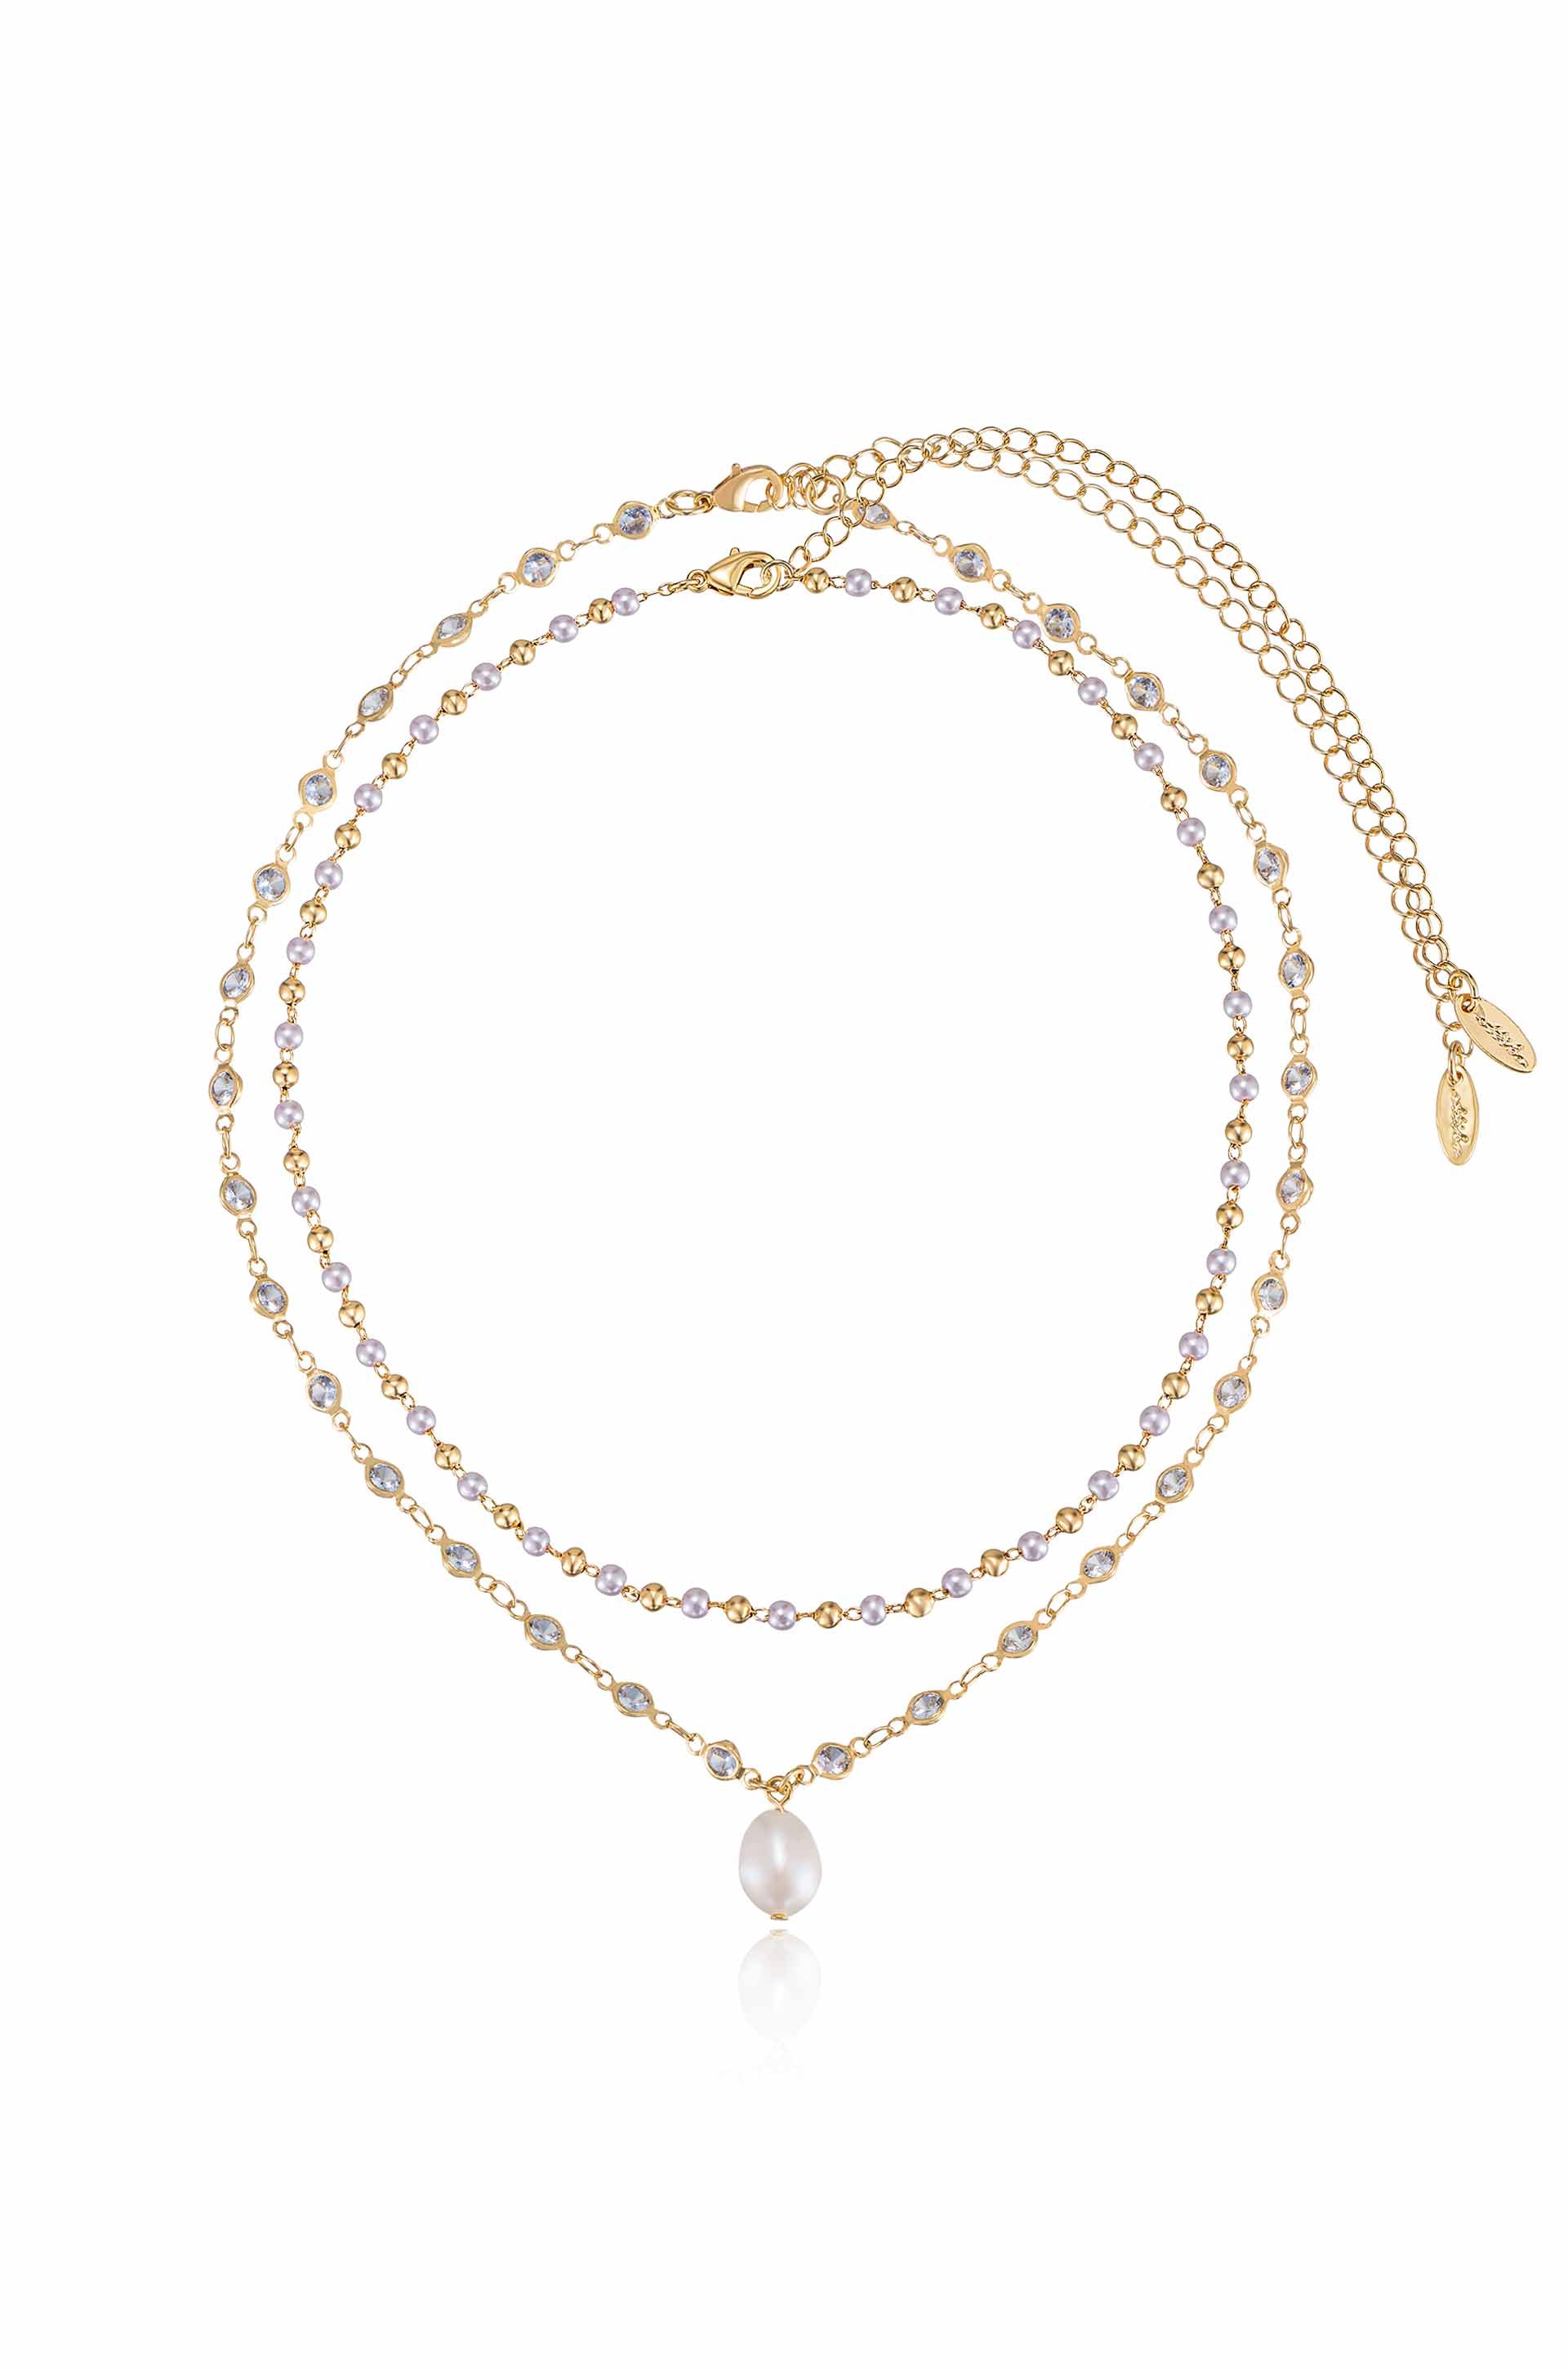 Crystal Spark and 18k Gold Plated Ball Chain Necklace Set